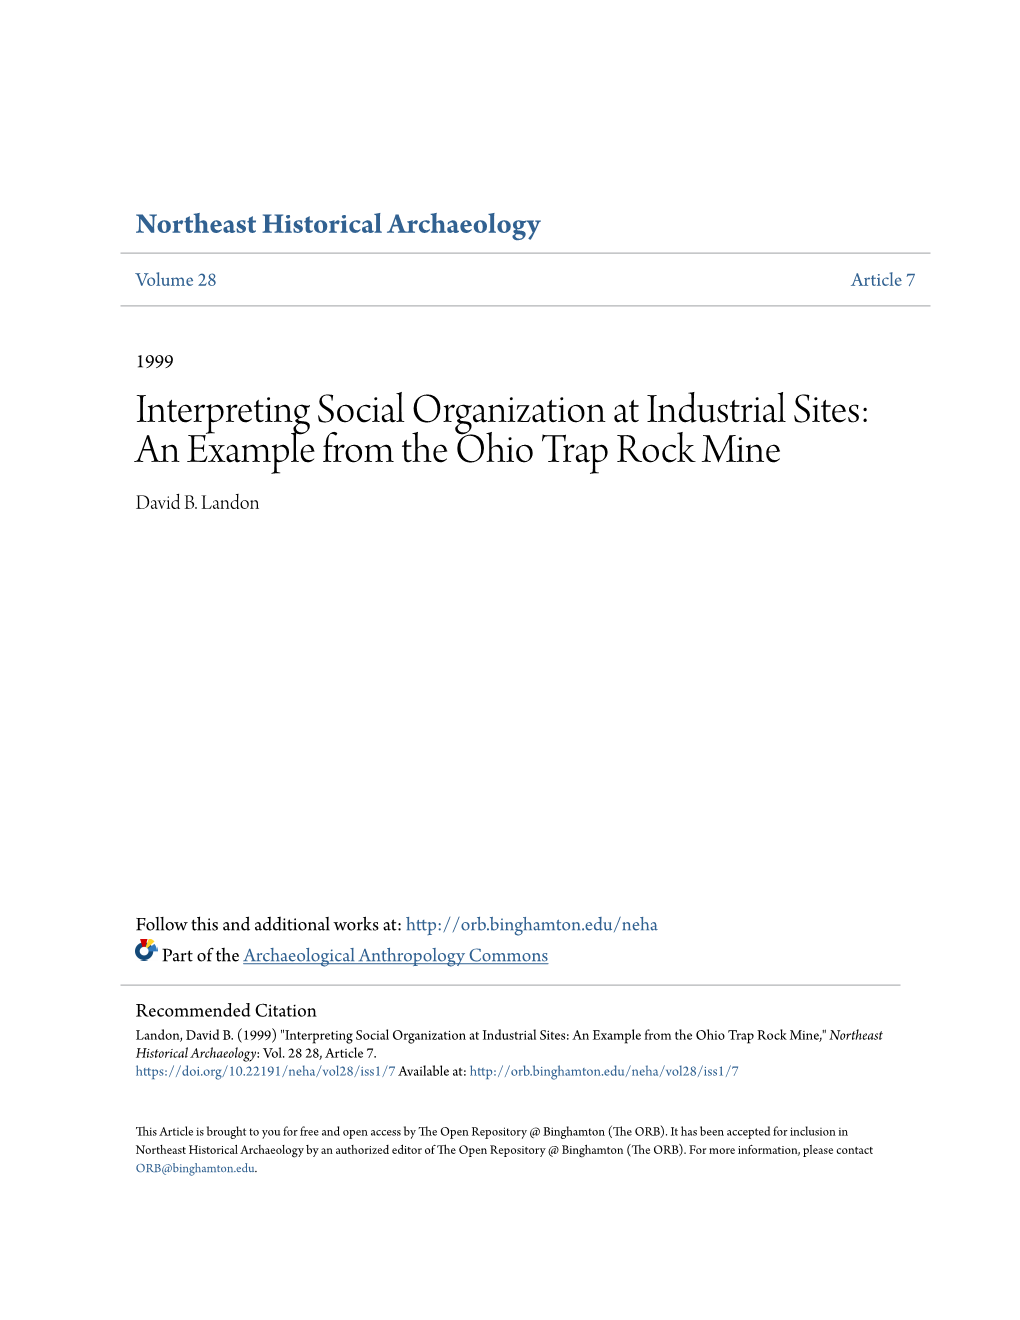 Interpreting Social Organization at Industrial Sites: an Example from the Ohio Trap Rock Mine David B